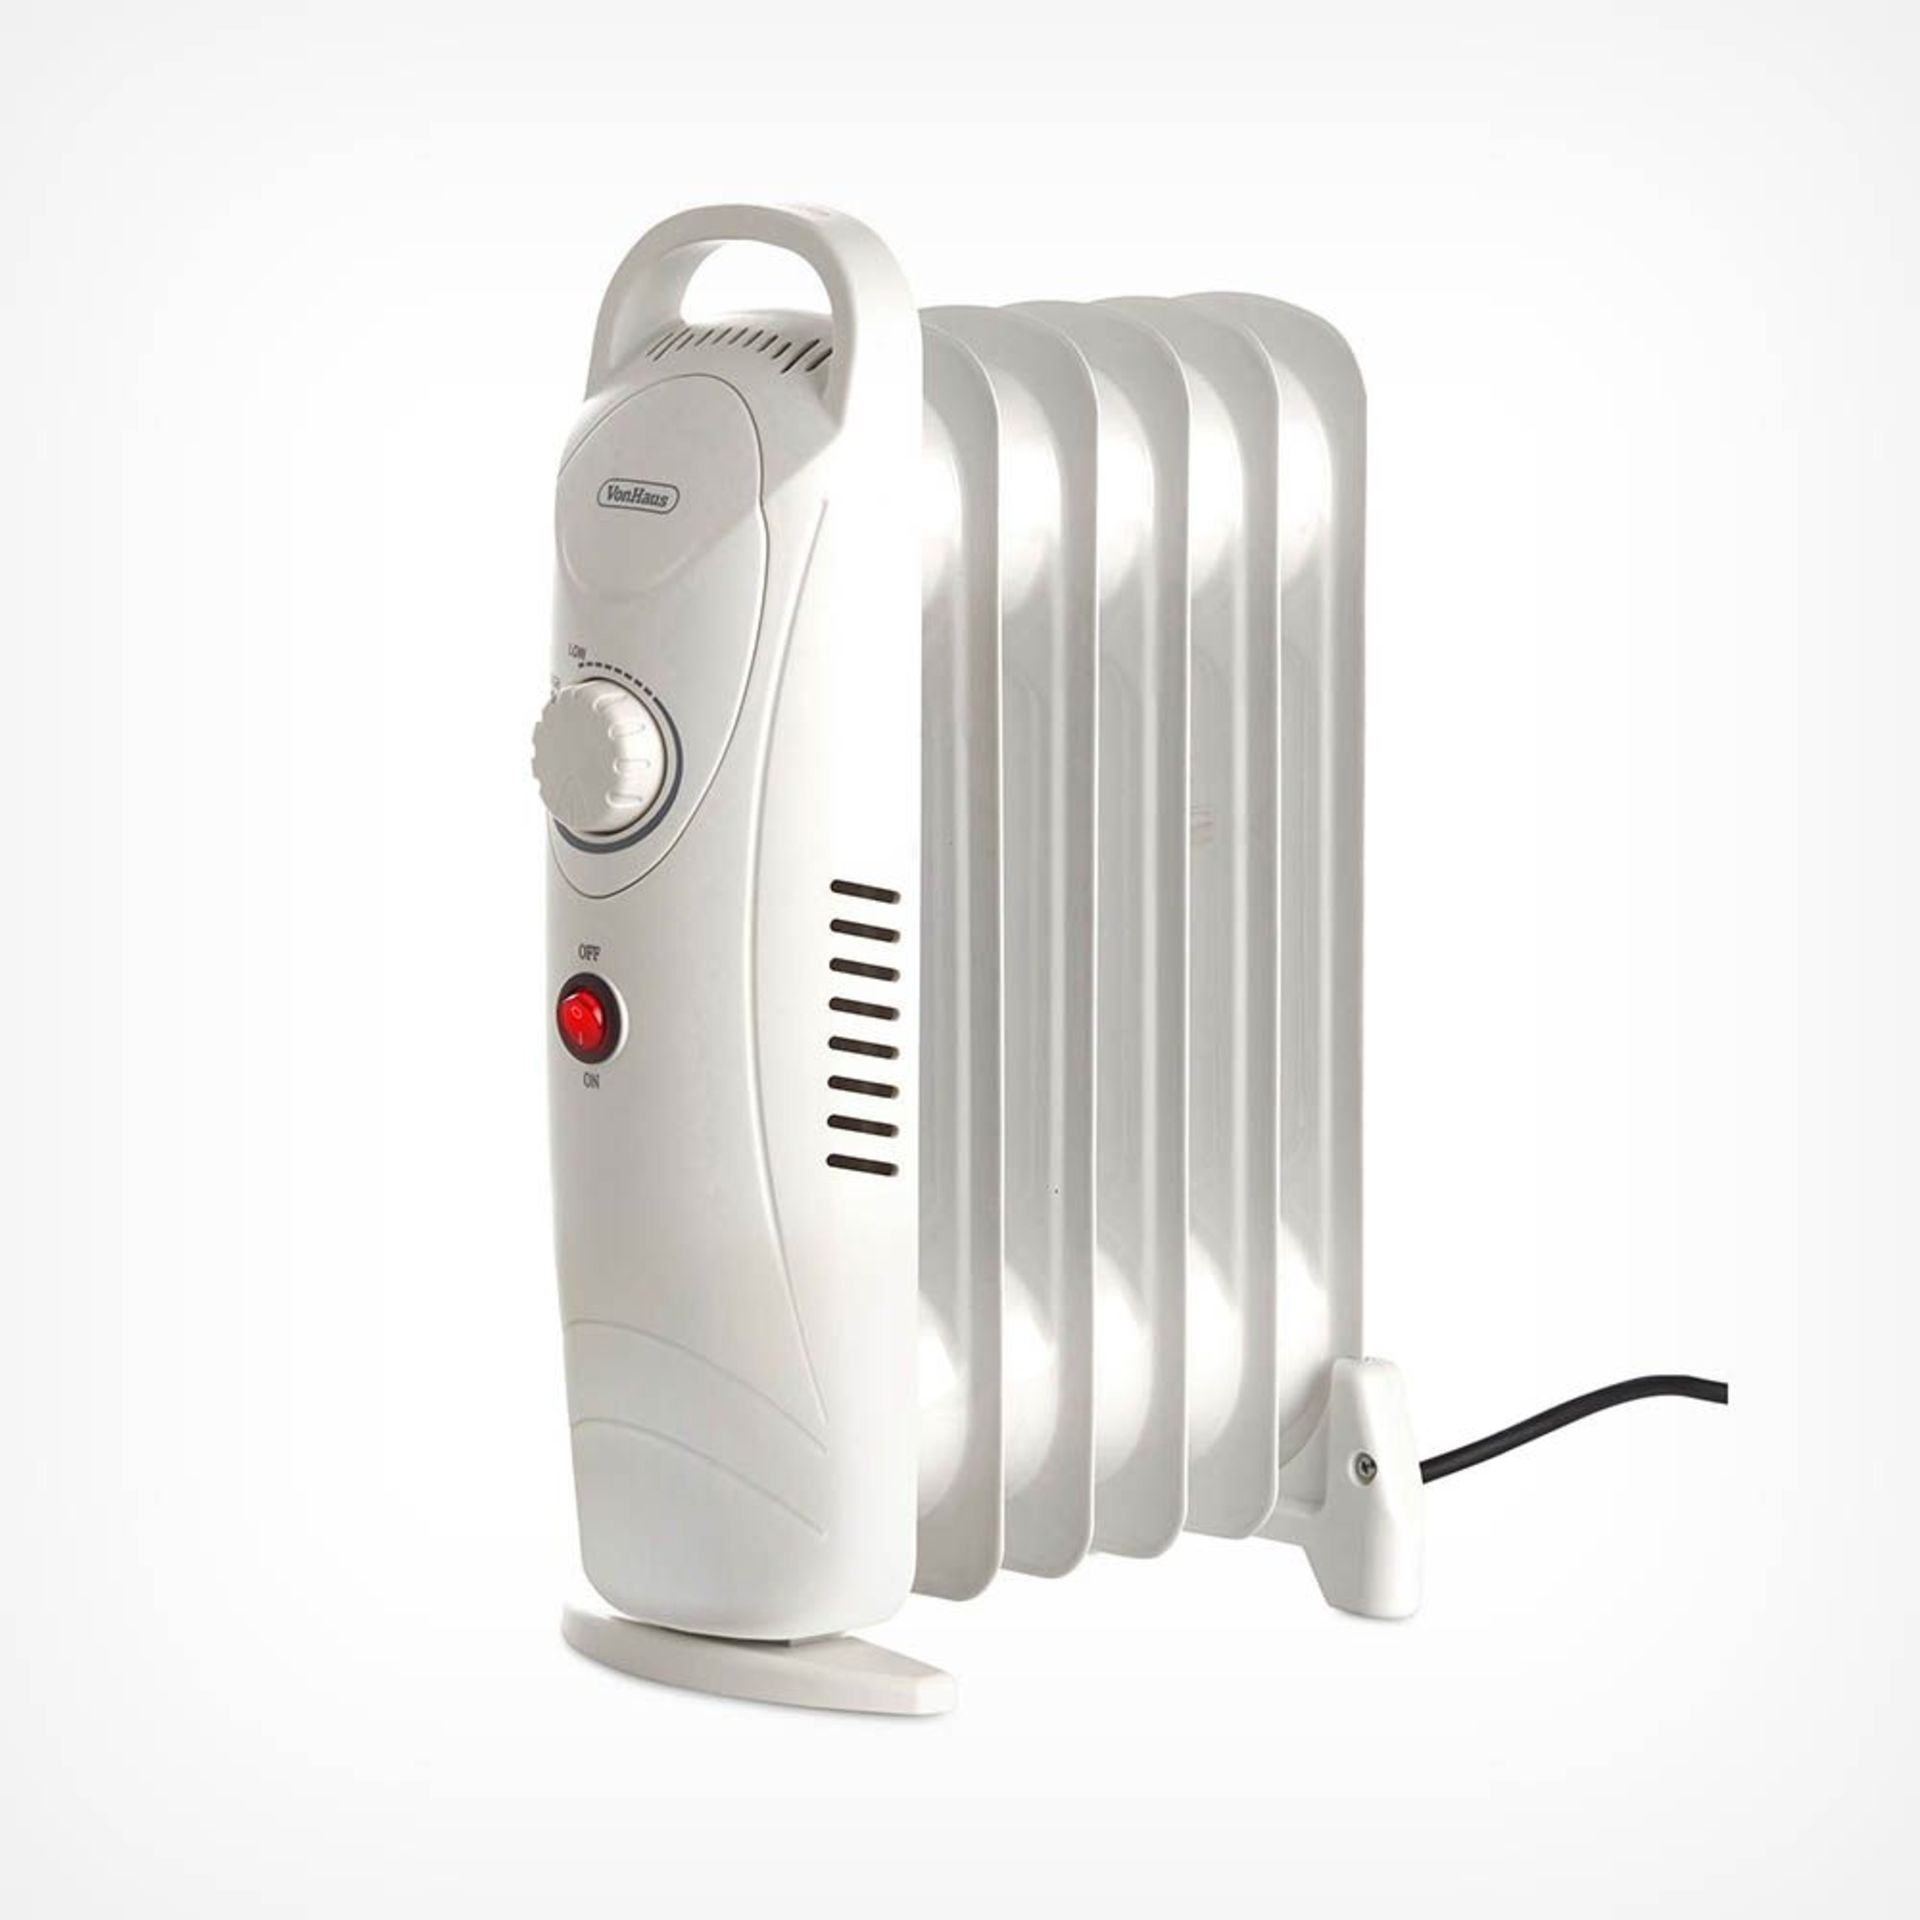 (SU1063) 6 Fin 800W Oil Filled Radiator - White Compact yet powerful 800W radiator with 6 oil-... - Image 2 of 3